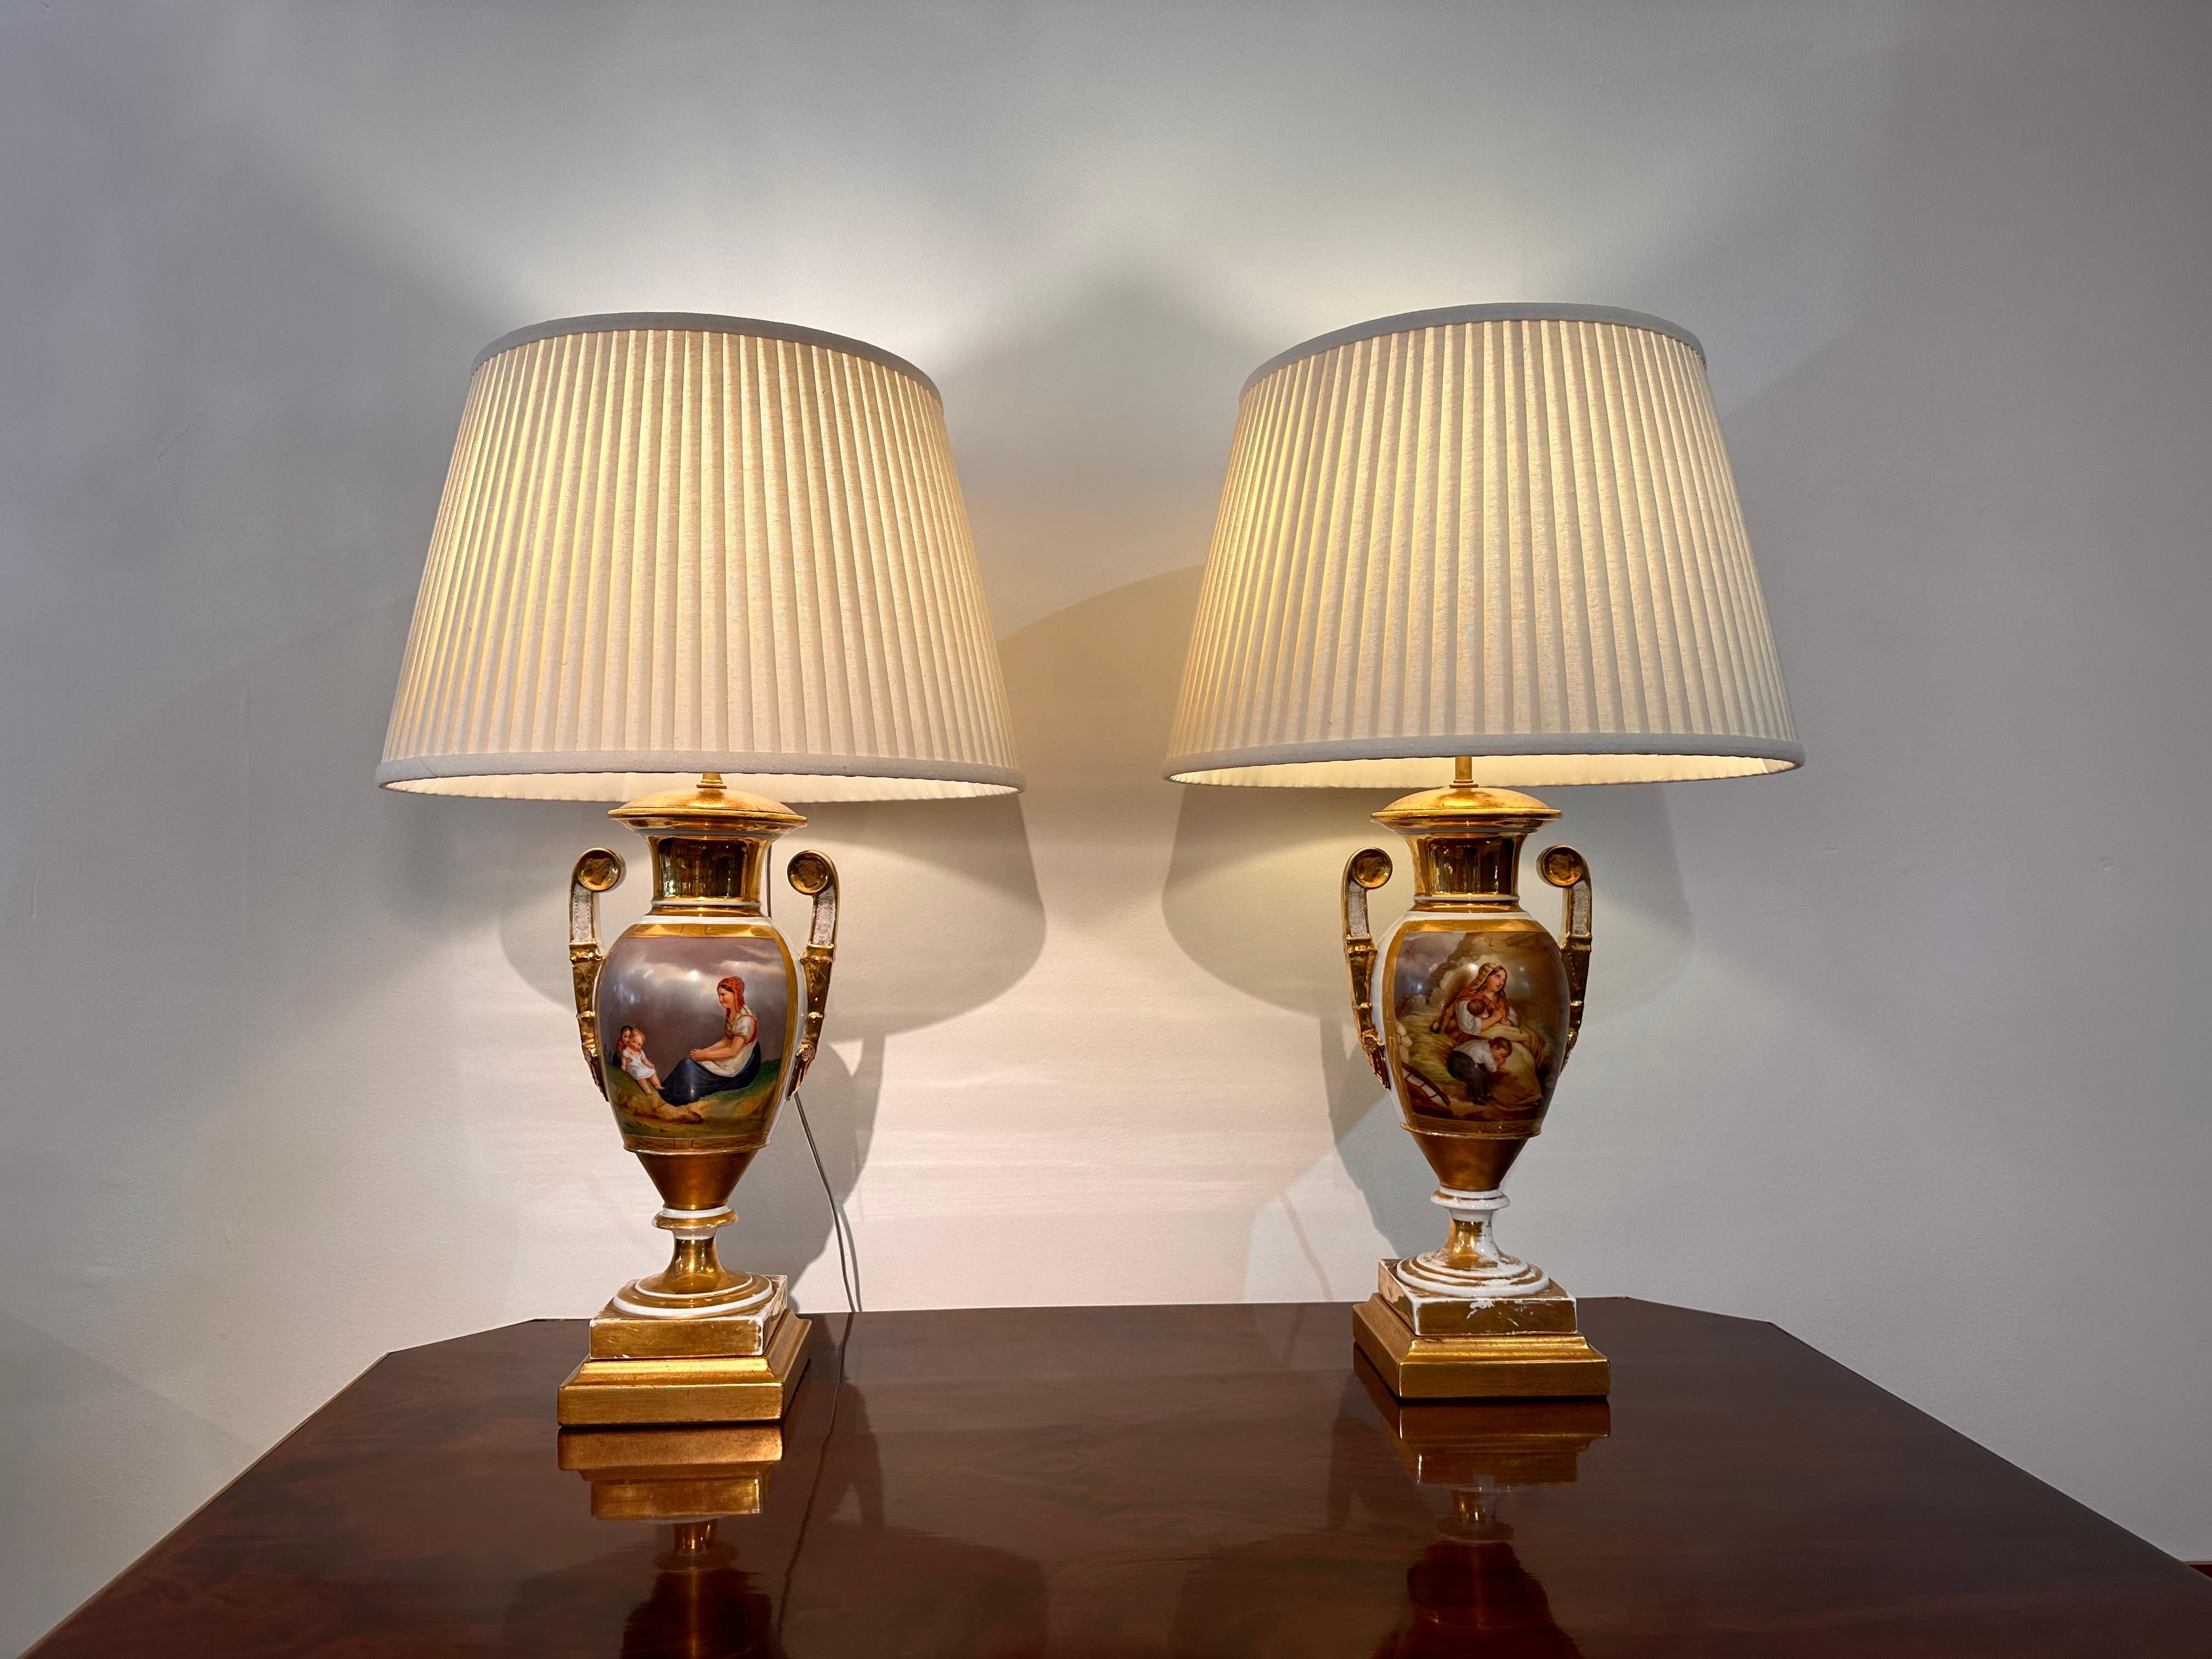 Gilt Paris Porcelain urns, wired as lamps